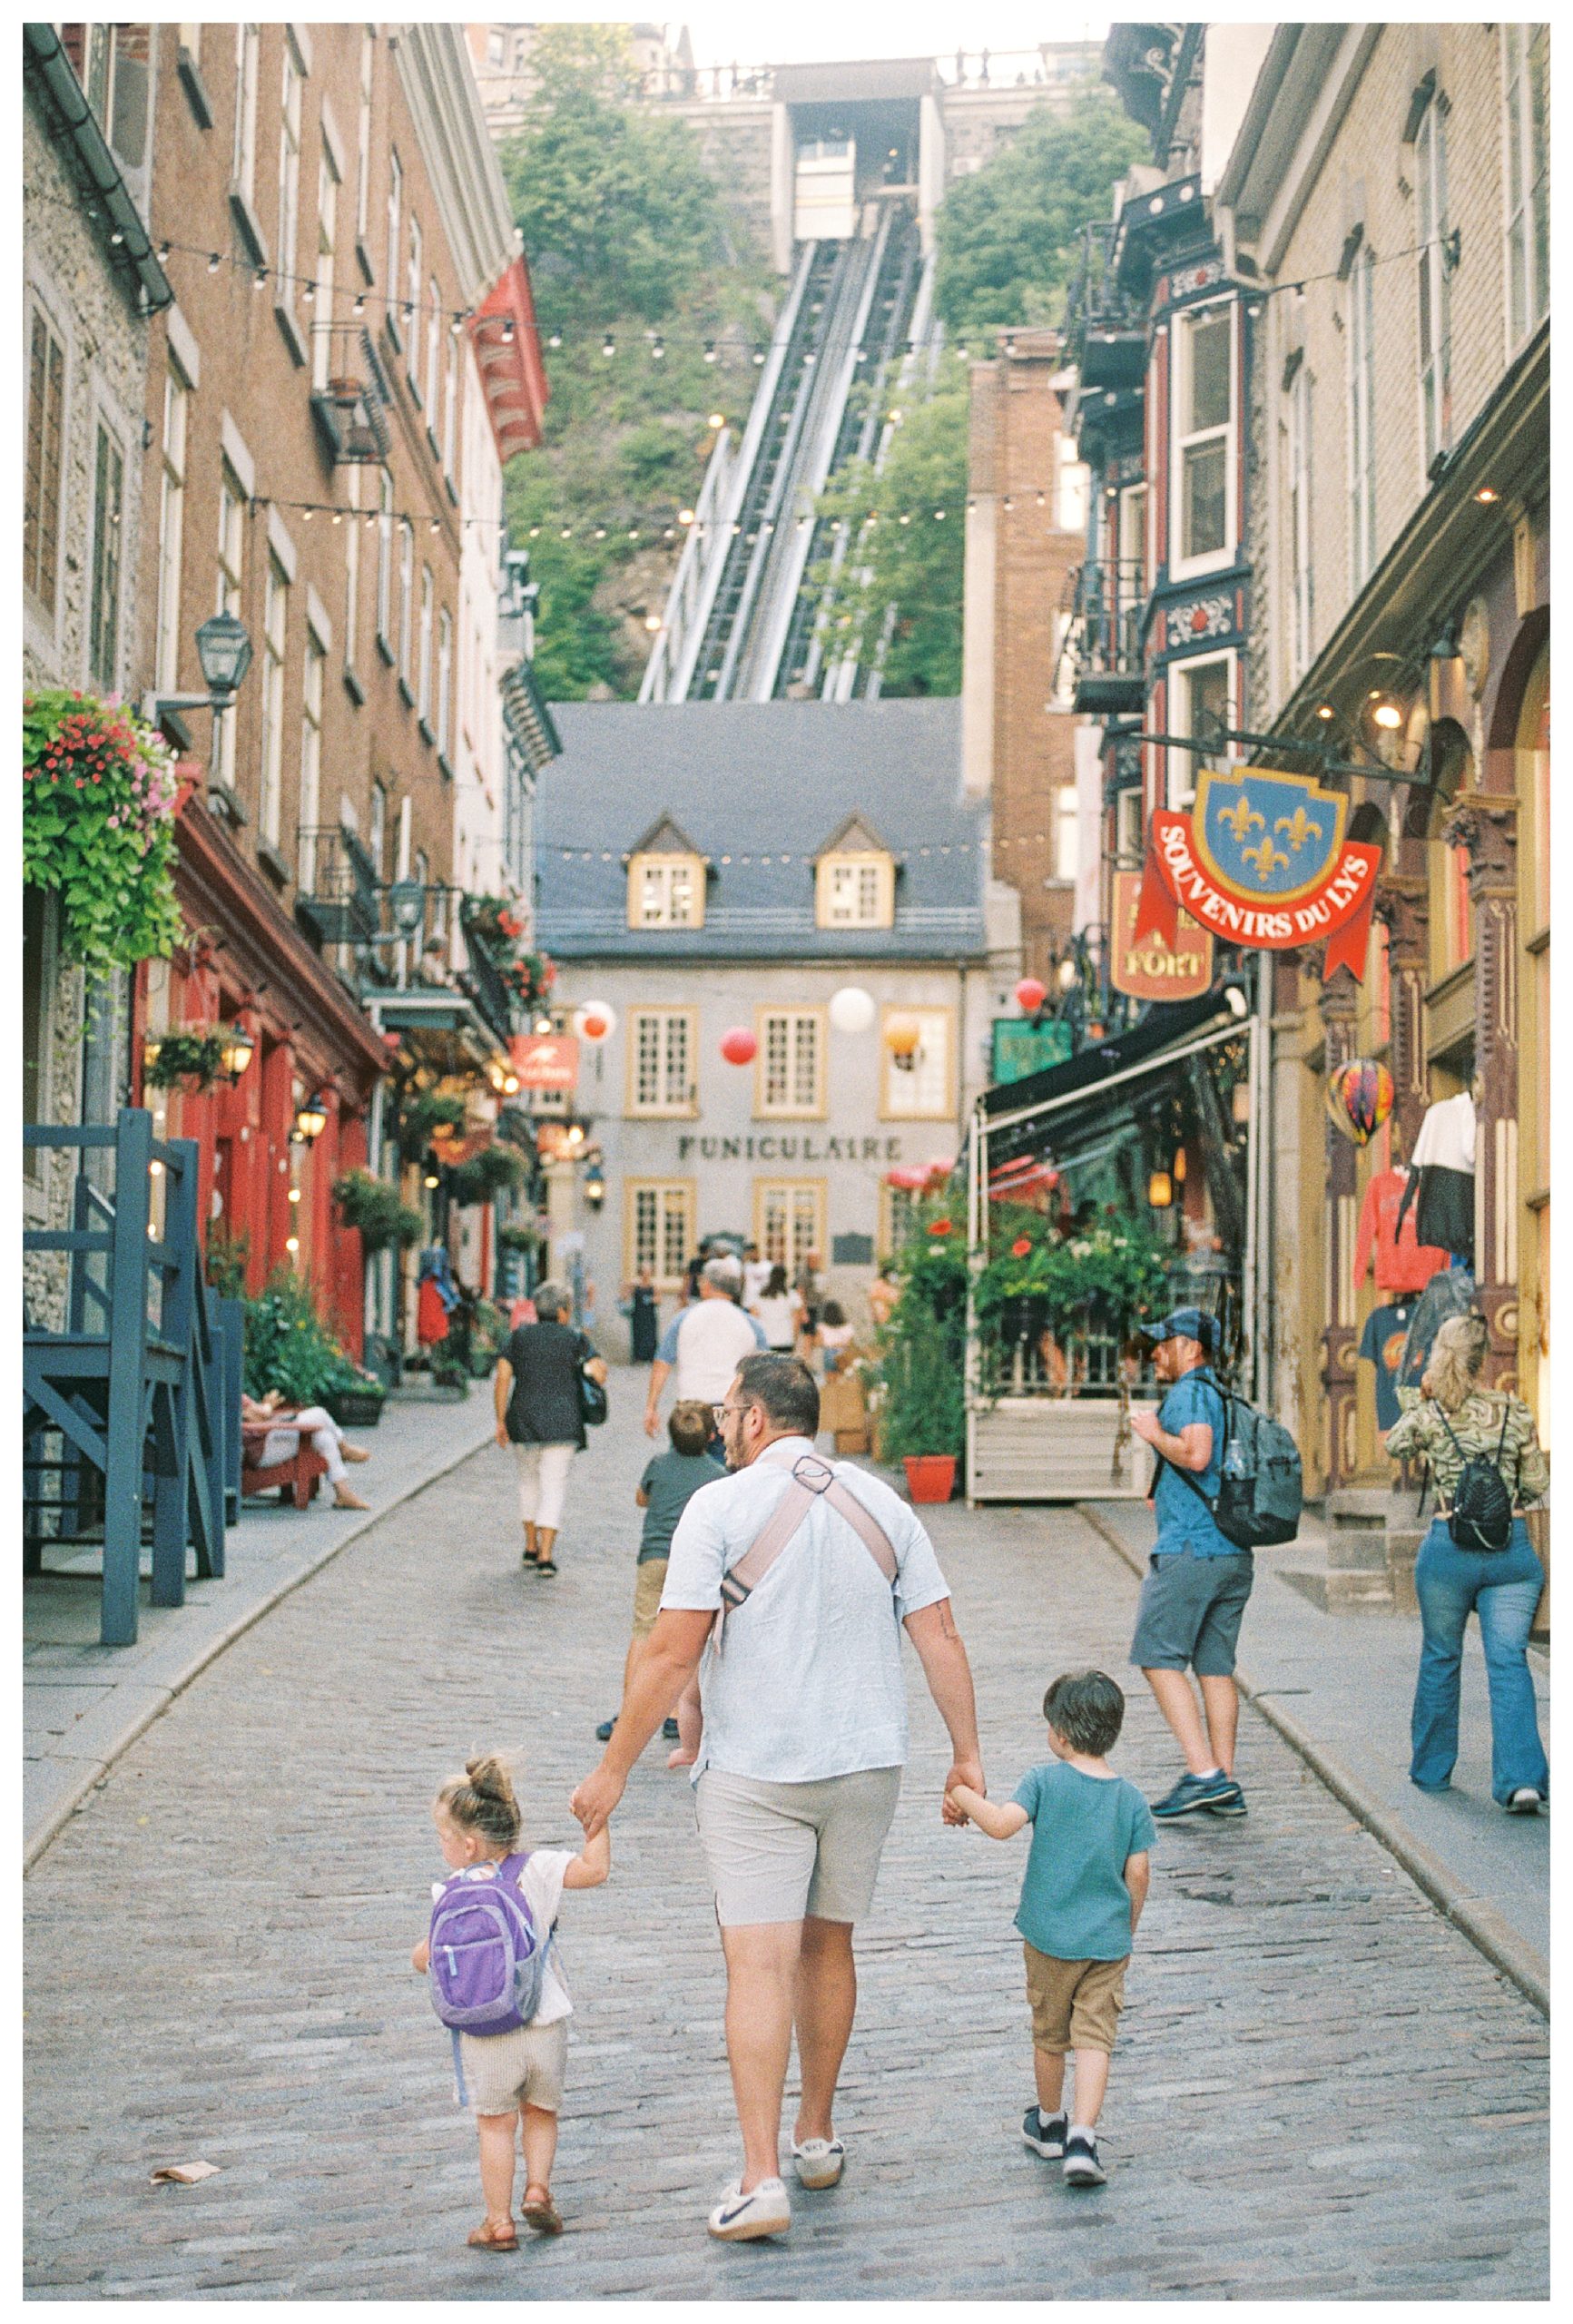 Father walks along street in Old Quebec towards the furniculaire with his two young children.